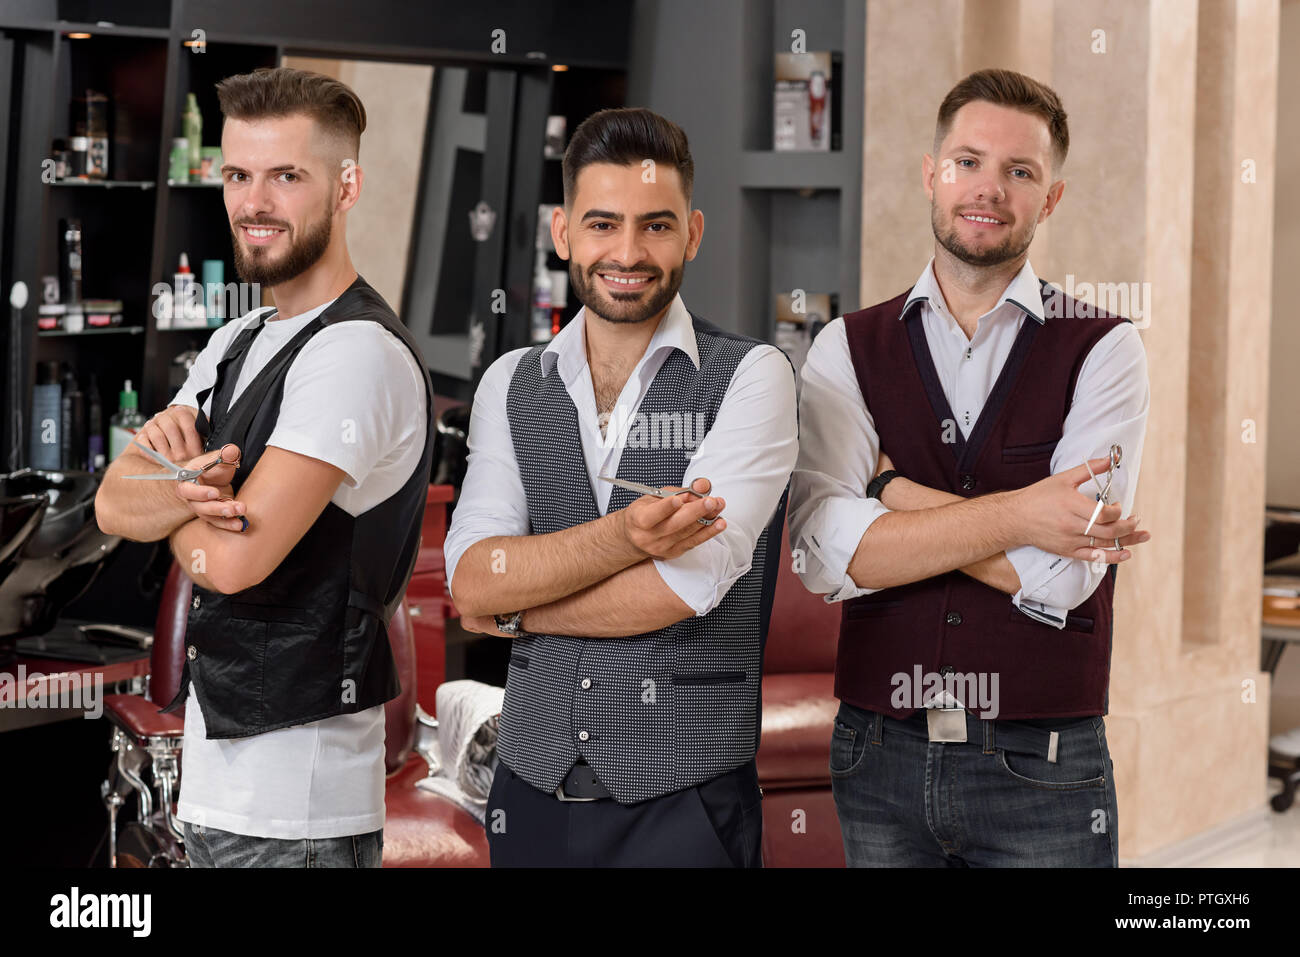 Barbers showing posing with crossed hands and looking at camera. Handsome hairdressers wearing white shirts and vests. Professional masters standing and posing in barbershop. Stock Photo